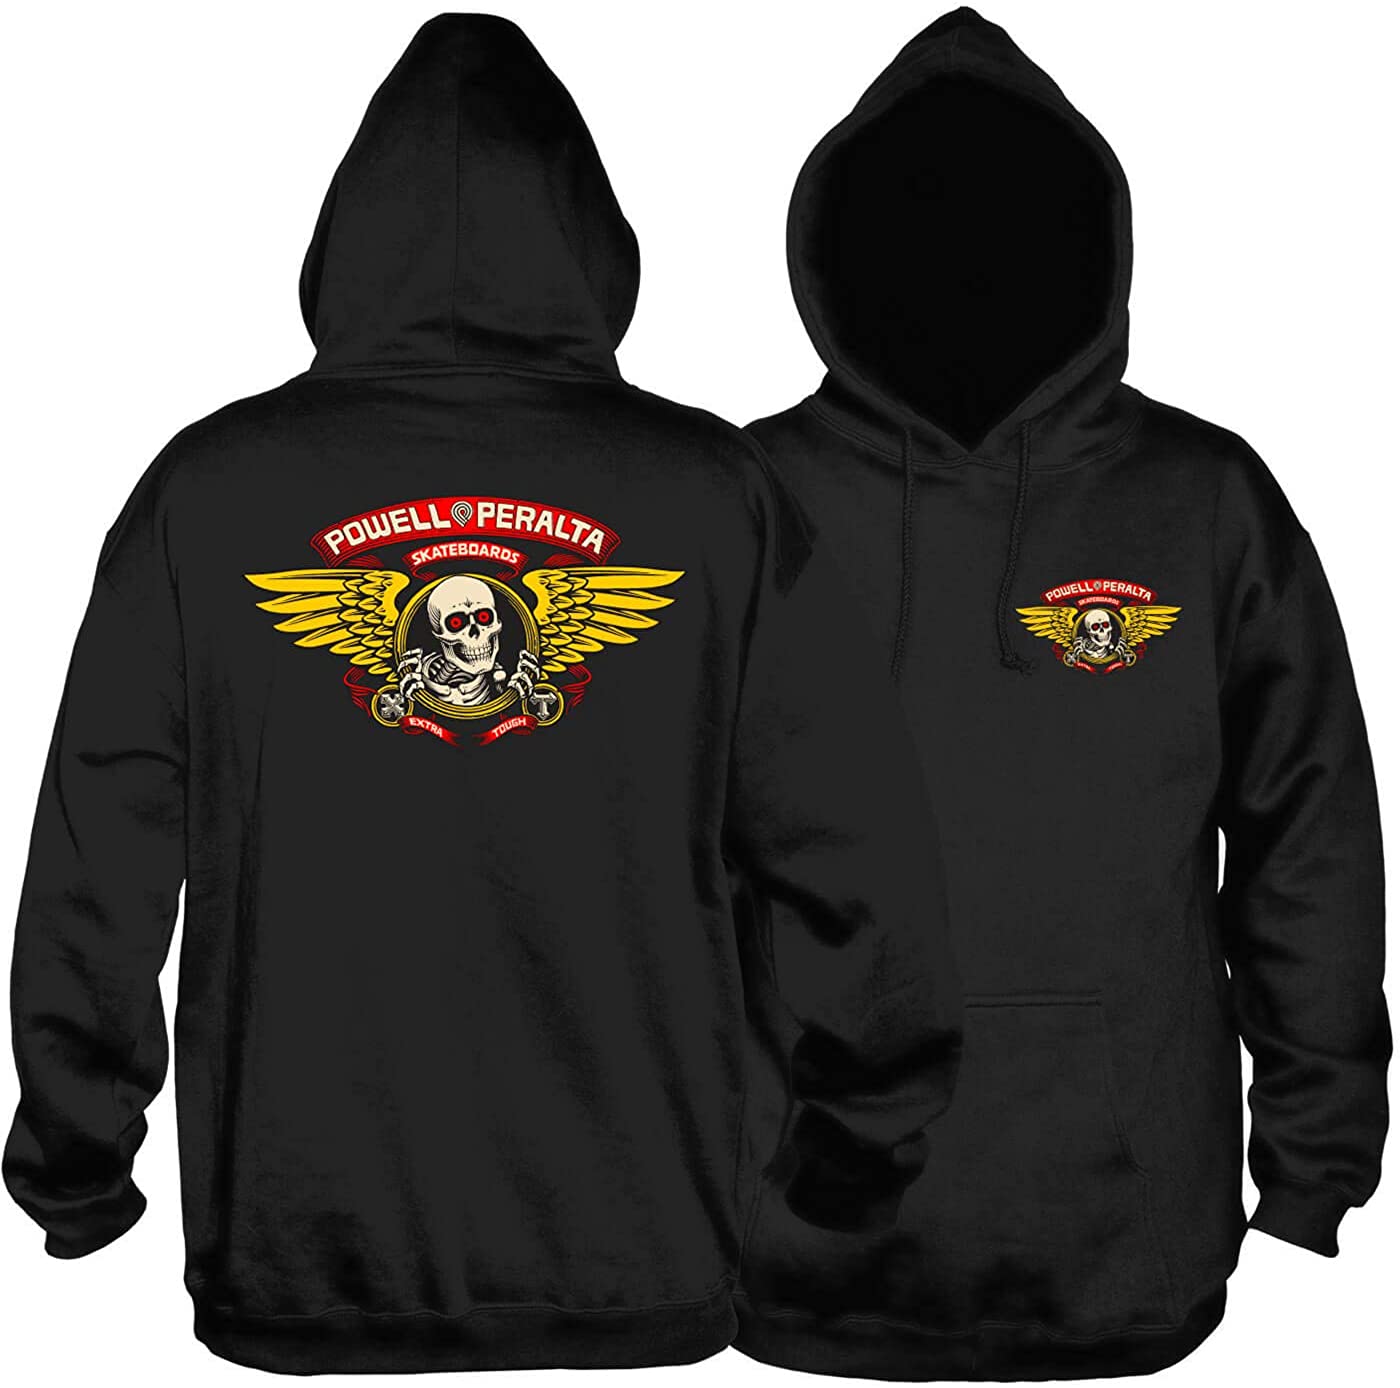 POWELL PERALTA SWEATER - WINGED RIPPER MID-WEIGHT HOOD BLACK - The Drive Skateshop